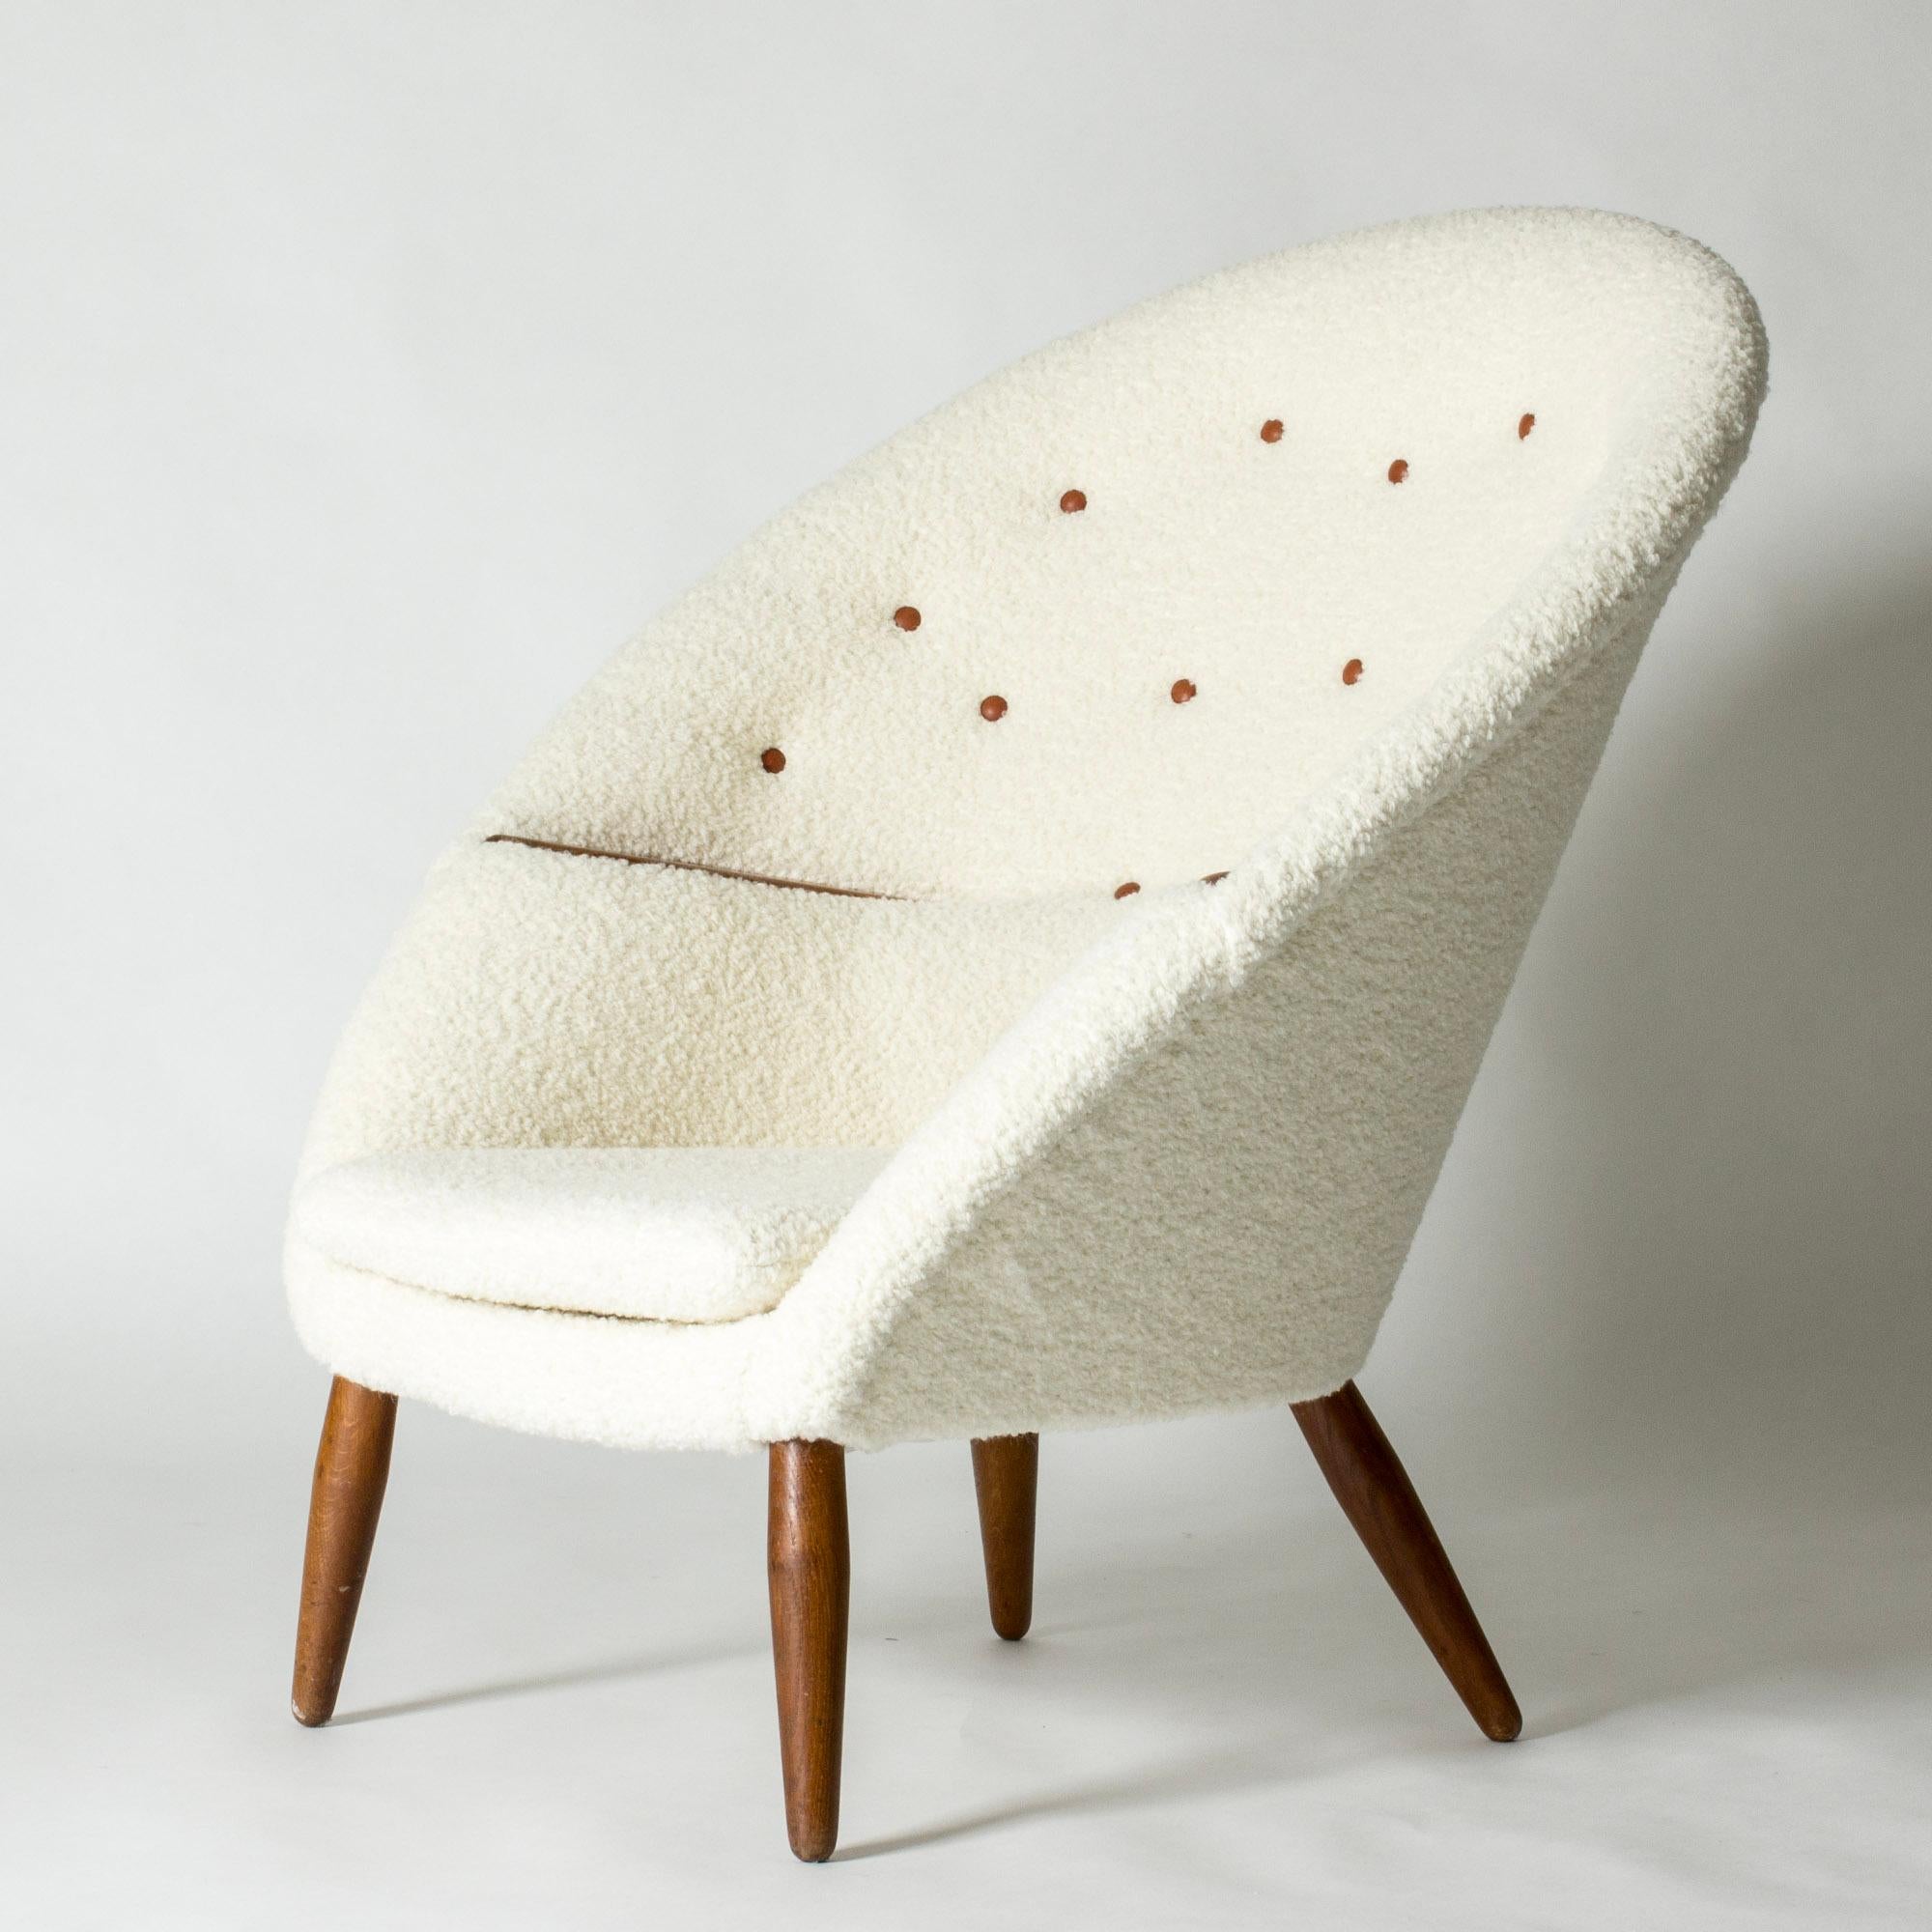 Amazing “MS-9” or “Oda” lounge chair by Arnold Madsen, with a striking round silhouette. Cocoon model with decorative teak details on the arms. Upholstered with bouclé fabric, leather dressed buttons in the back.